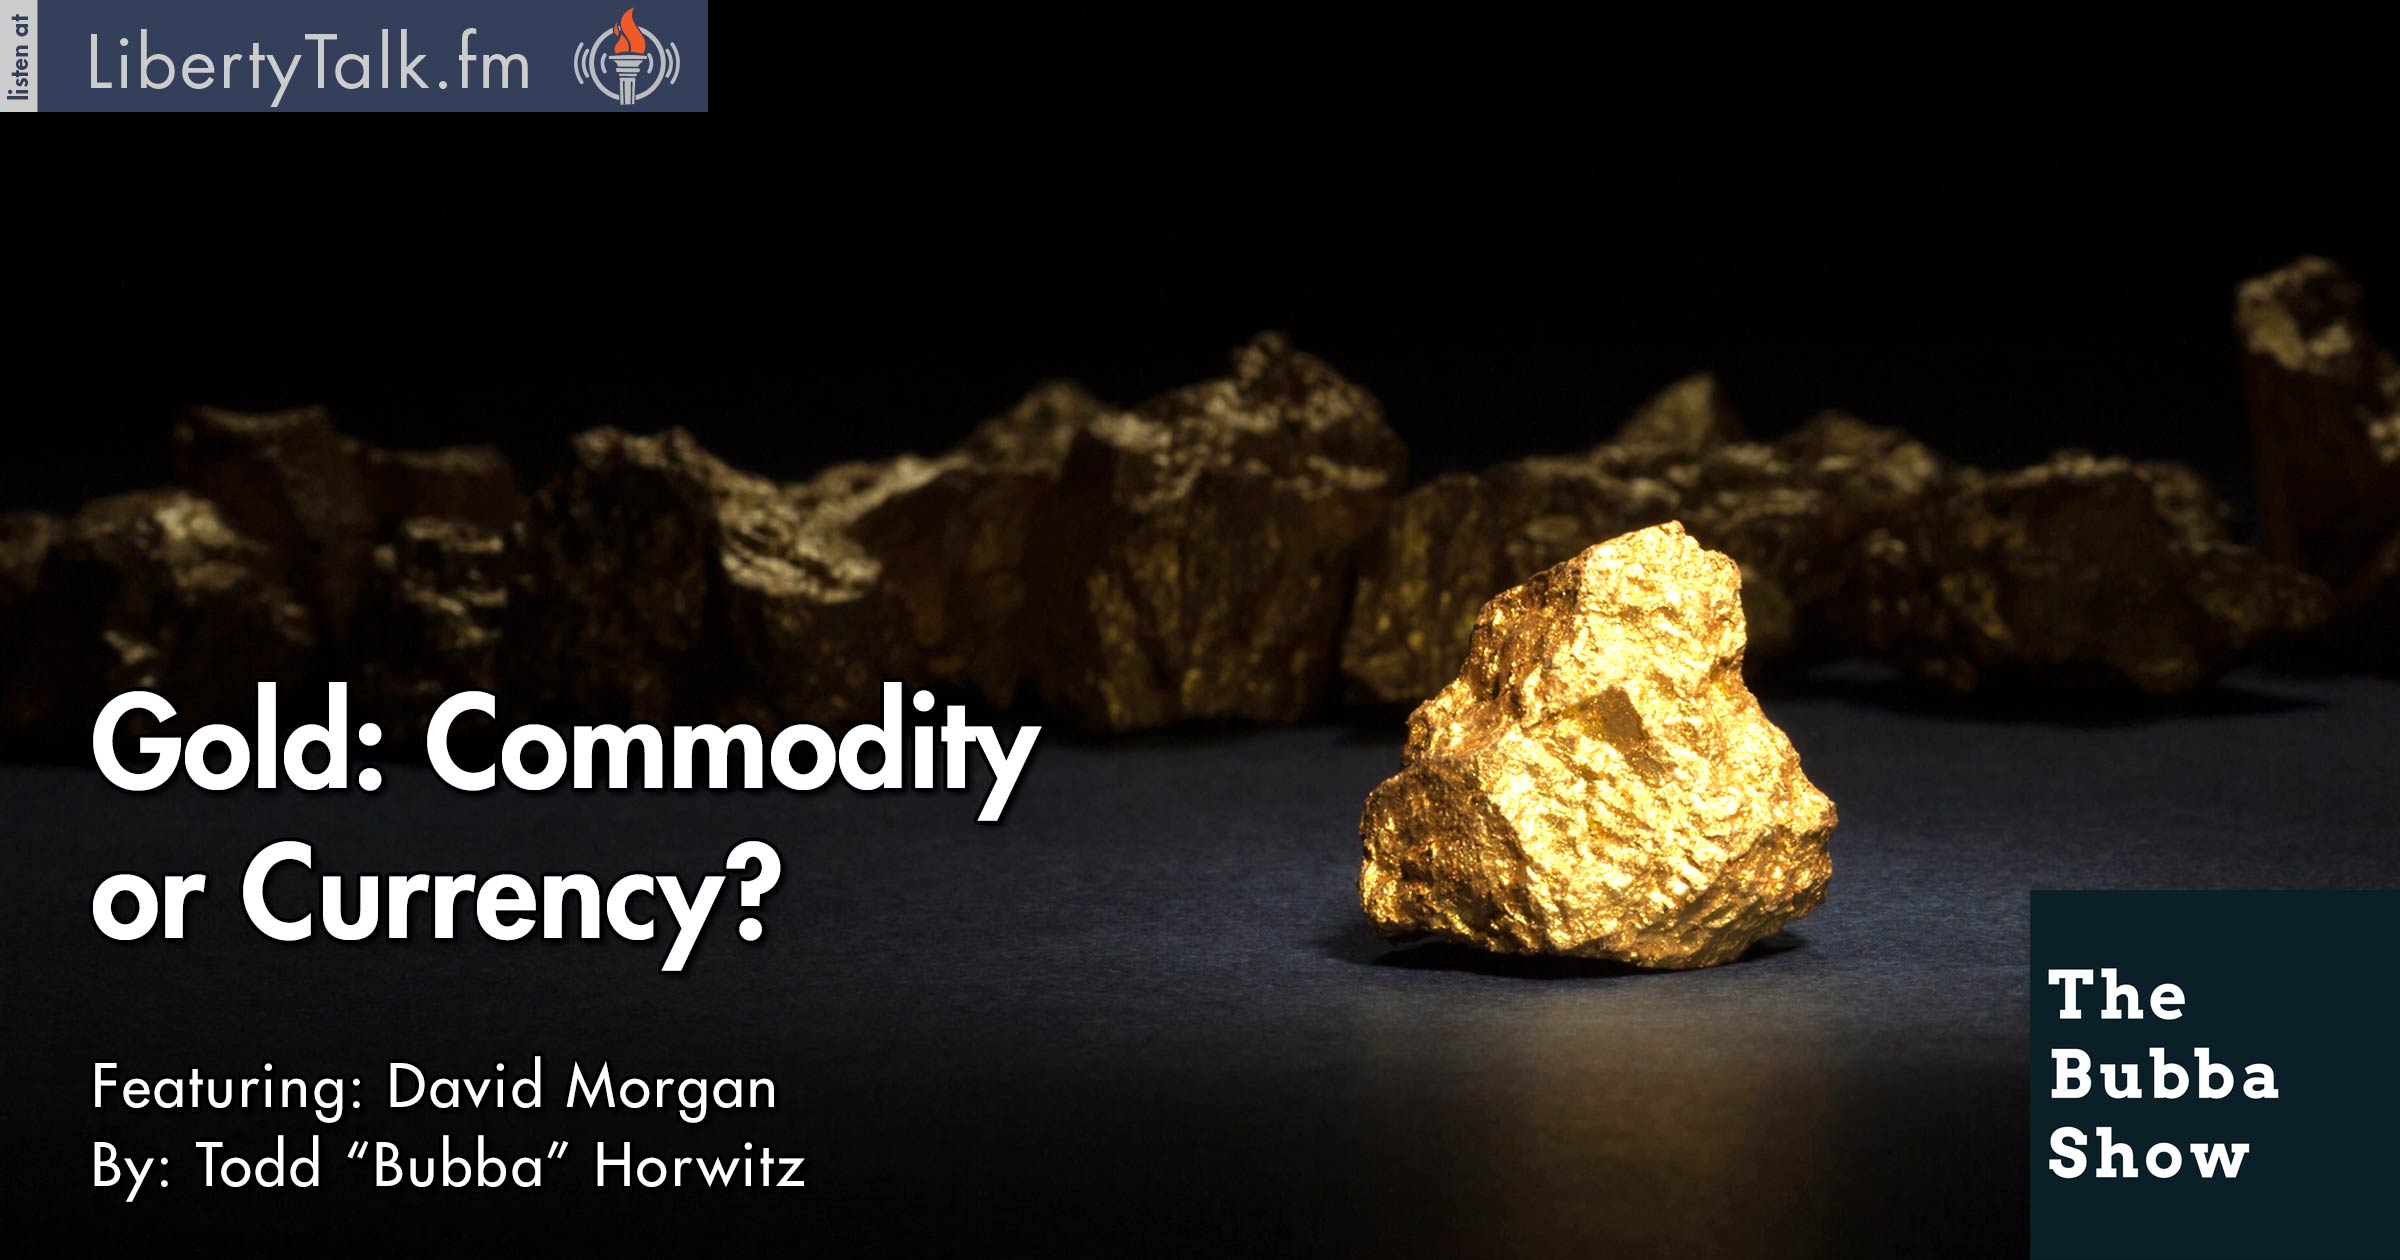 Gold: Commodity or Currency? The Bubba Show